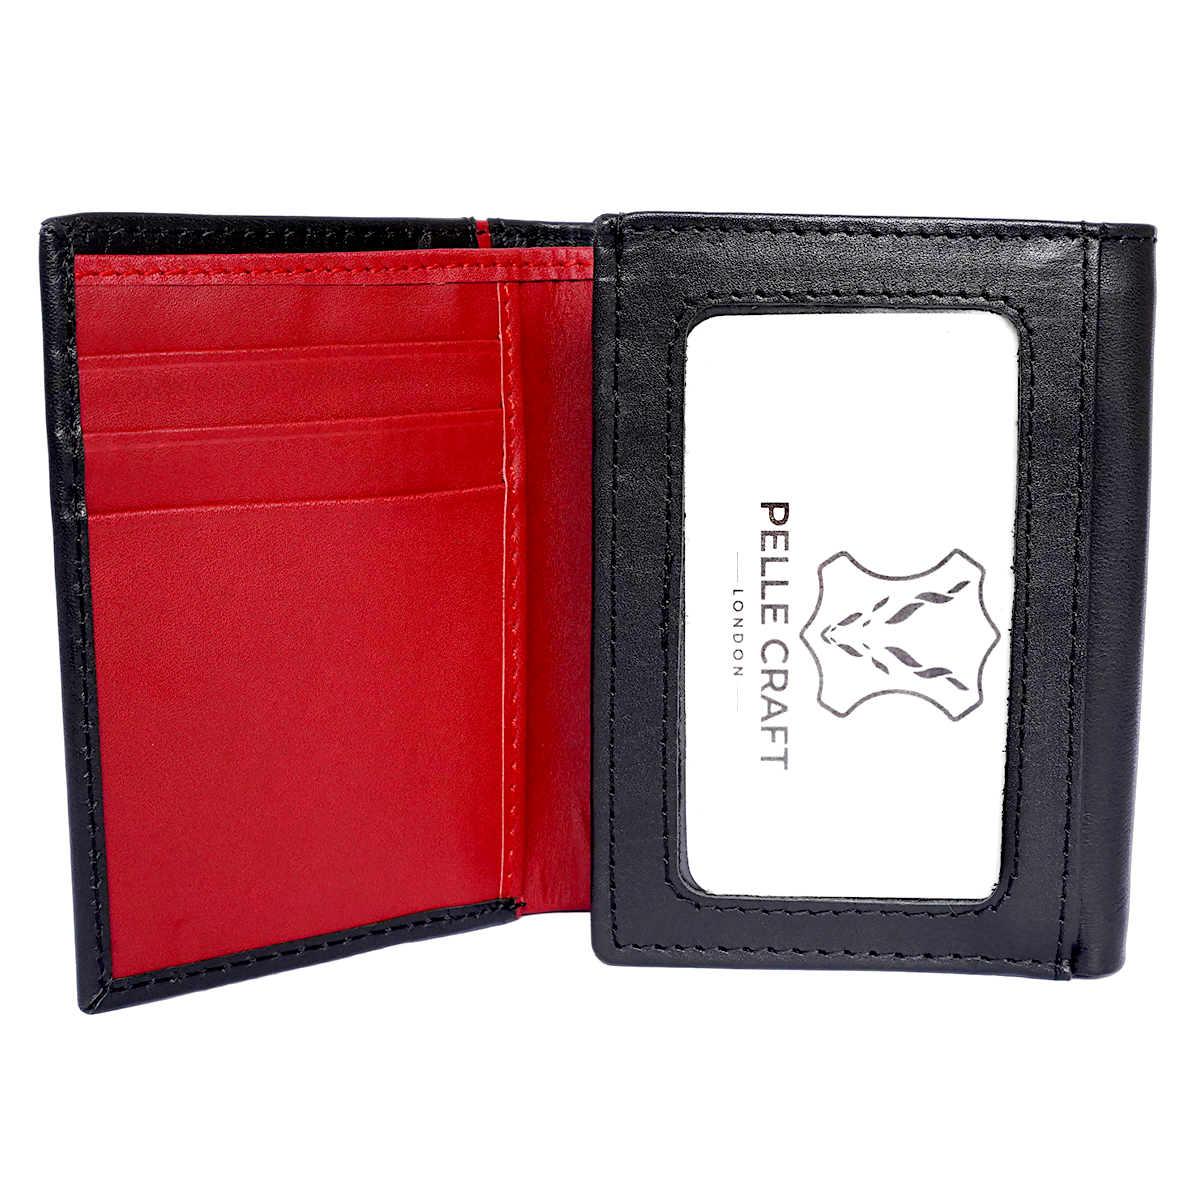 TRIFOLD WALLET WITH 12 C/C & WINDOW